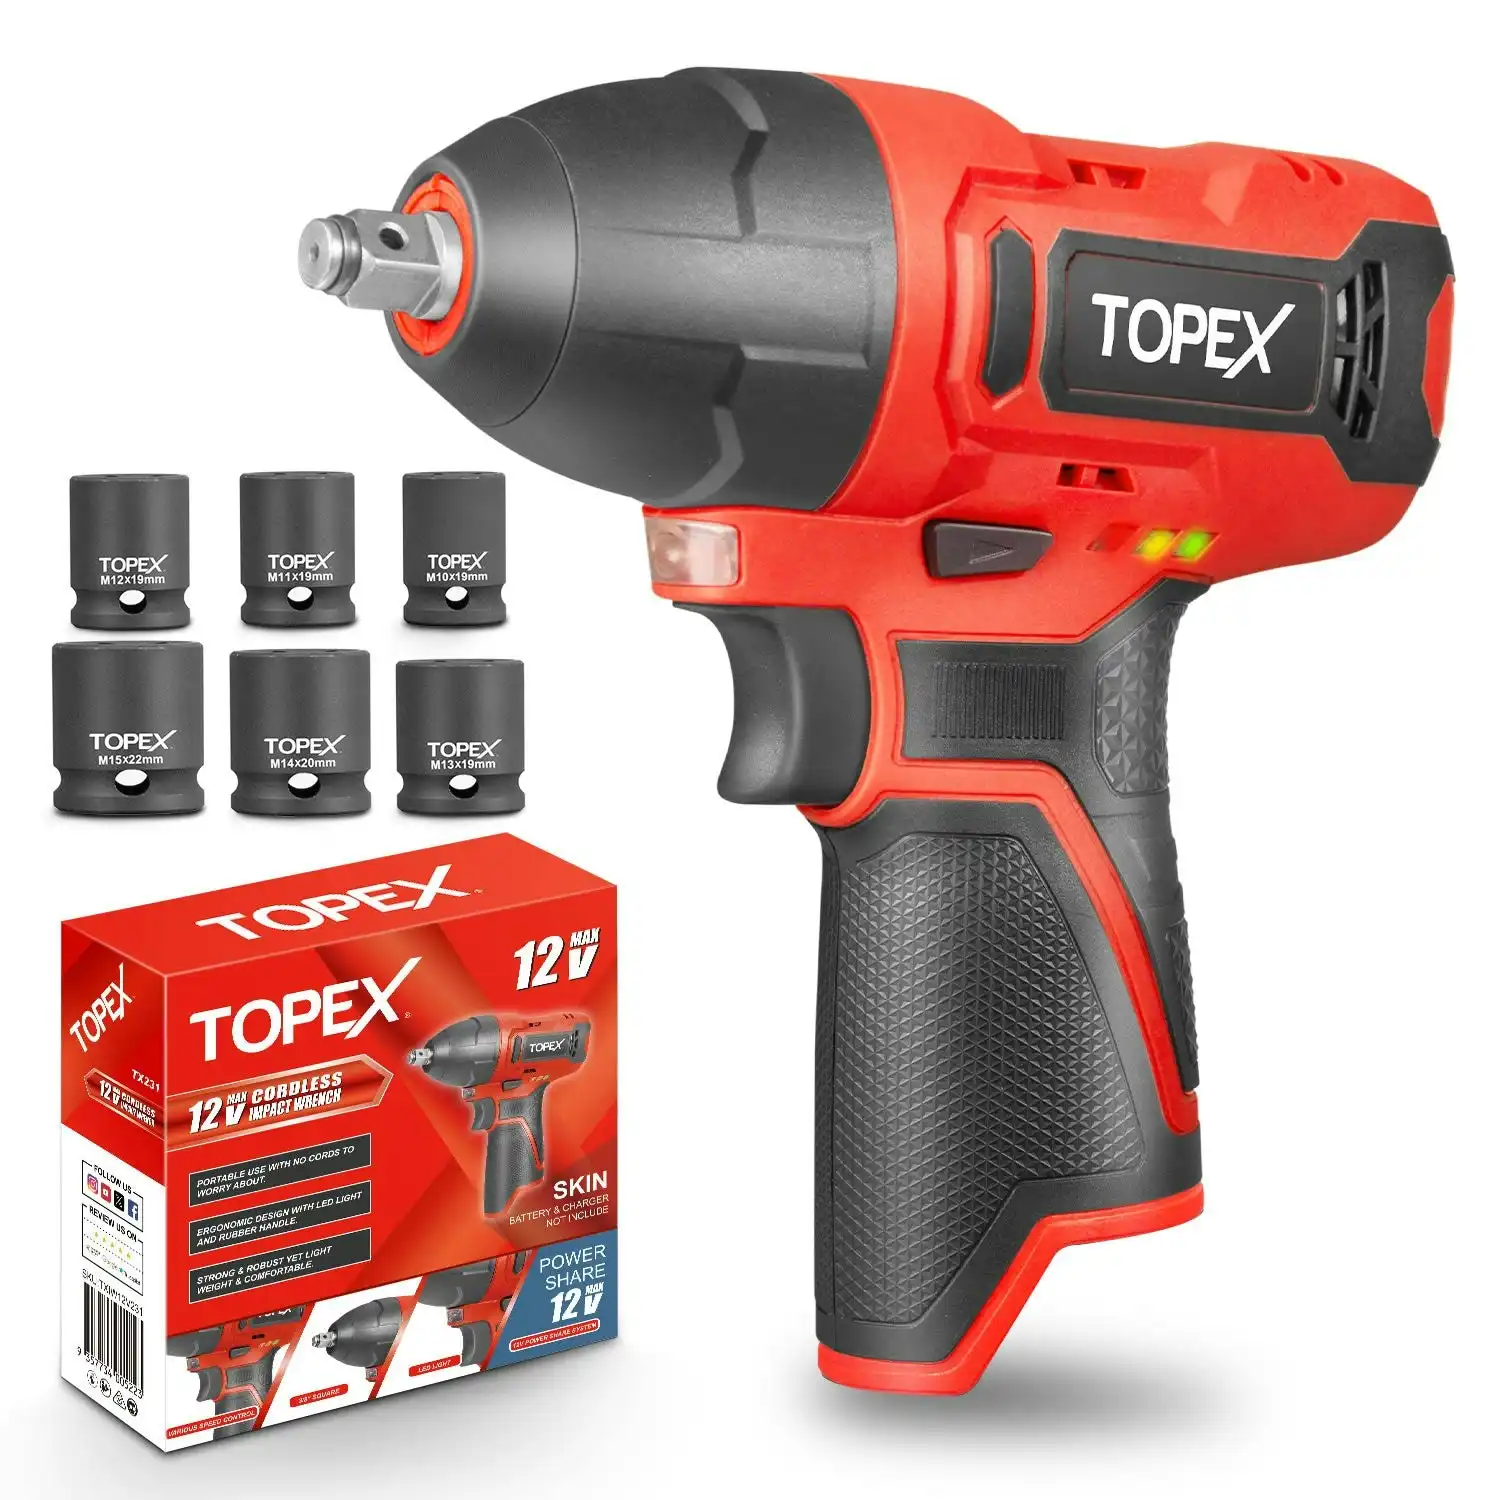 Topex 12V Cordless Impact Wrench with 3/8-Inch Chuck, Torque Max 120 N.m, 6 Sockets Skin Only without Battery